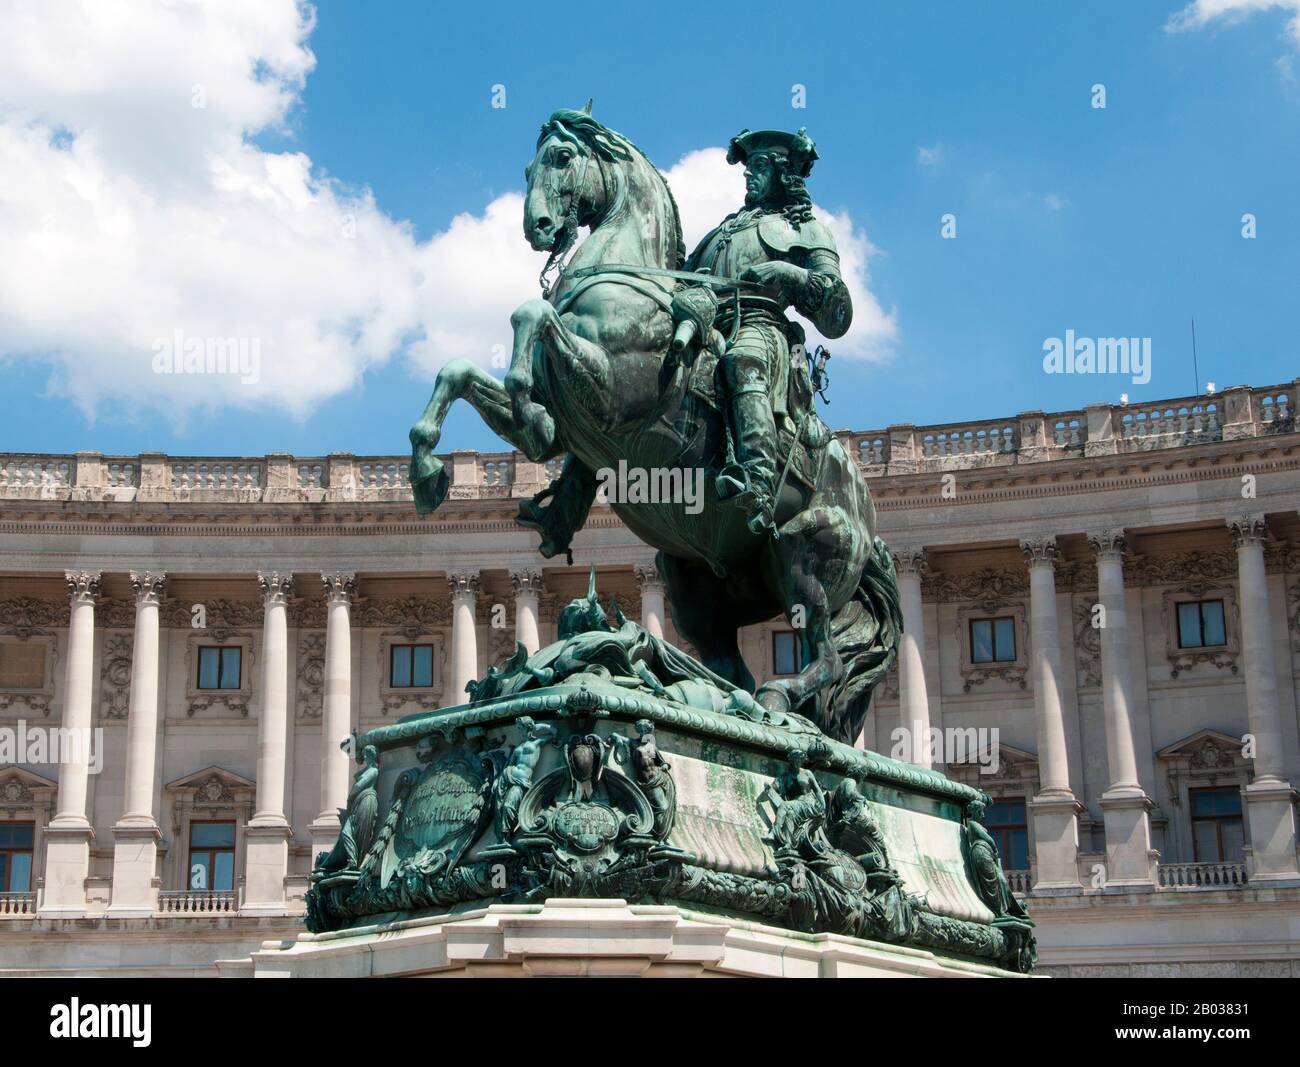 Austria: Prince Eugene of Savoy (1663 -1736), general and statesman of the Holy Roman Empire, equestrian statue in Heldenplatz, Vienna. Prince Eugene of Savoy (Prinz Eugen von Savoyen; 18 October 1663 – 21 April 1736) was a general of the Imperial Army and statesman of the Holy Roman Empire and the Archduchy of Austria and one of the most successful military commanders in modern European history, rising to the highest offices of state at the Imperial court in Vienna. Stock Photo